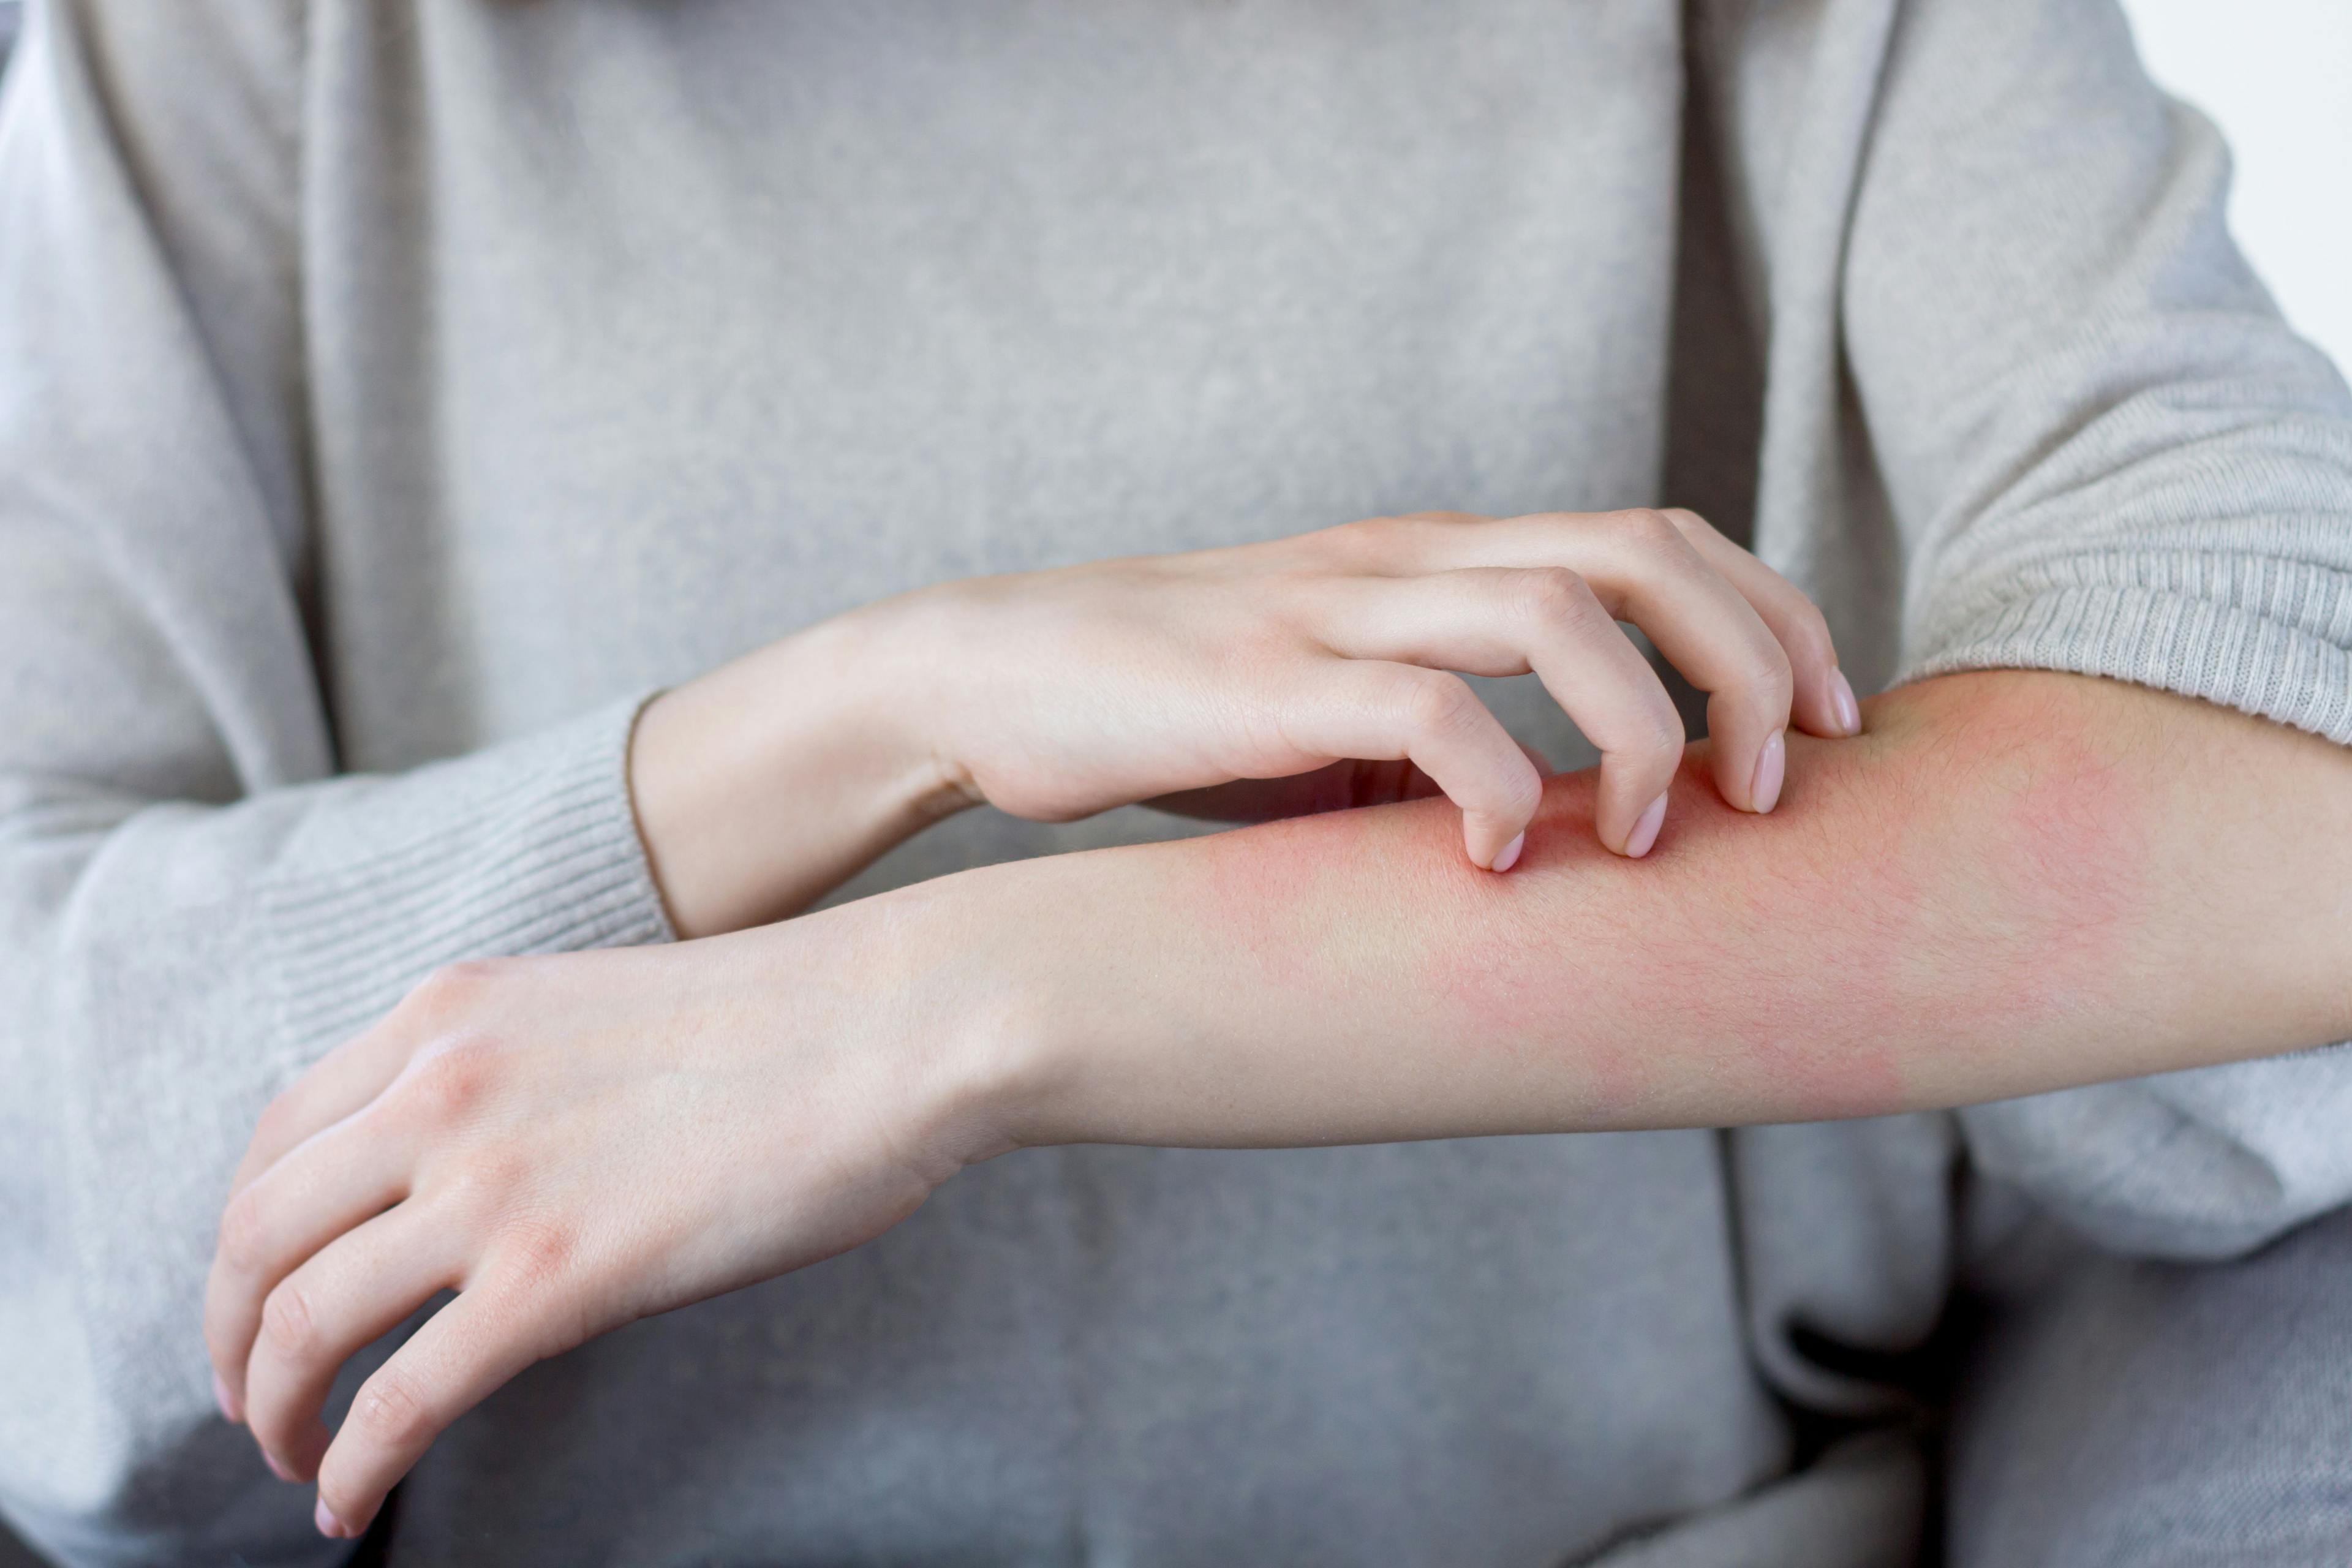 Closeup girl is scratching her hand with nails. Reddened, inflamed body parts causes discomfort and itching. Young woman is suffering from bouts of allergies. Dermatological skin diseases concept. | Image Credit: Monstar Studio - stock.adobe.com